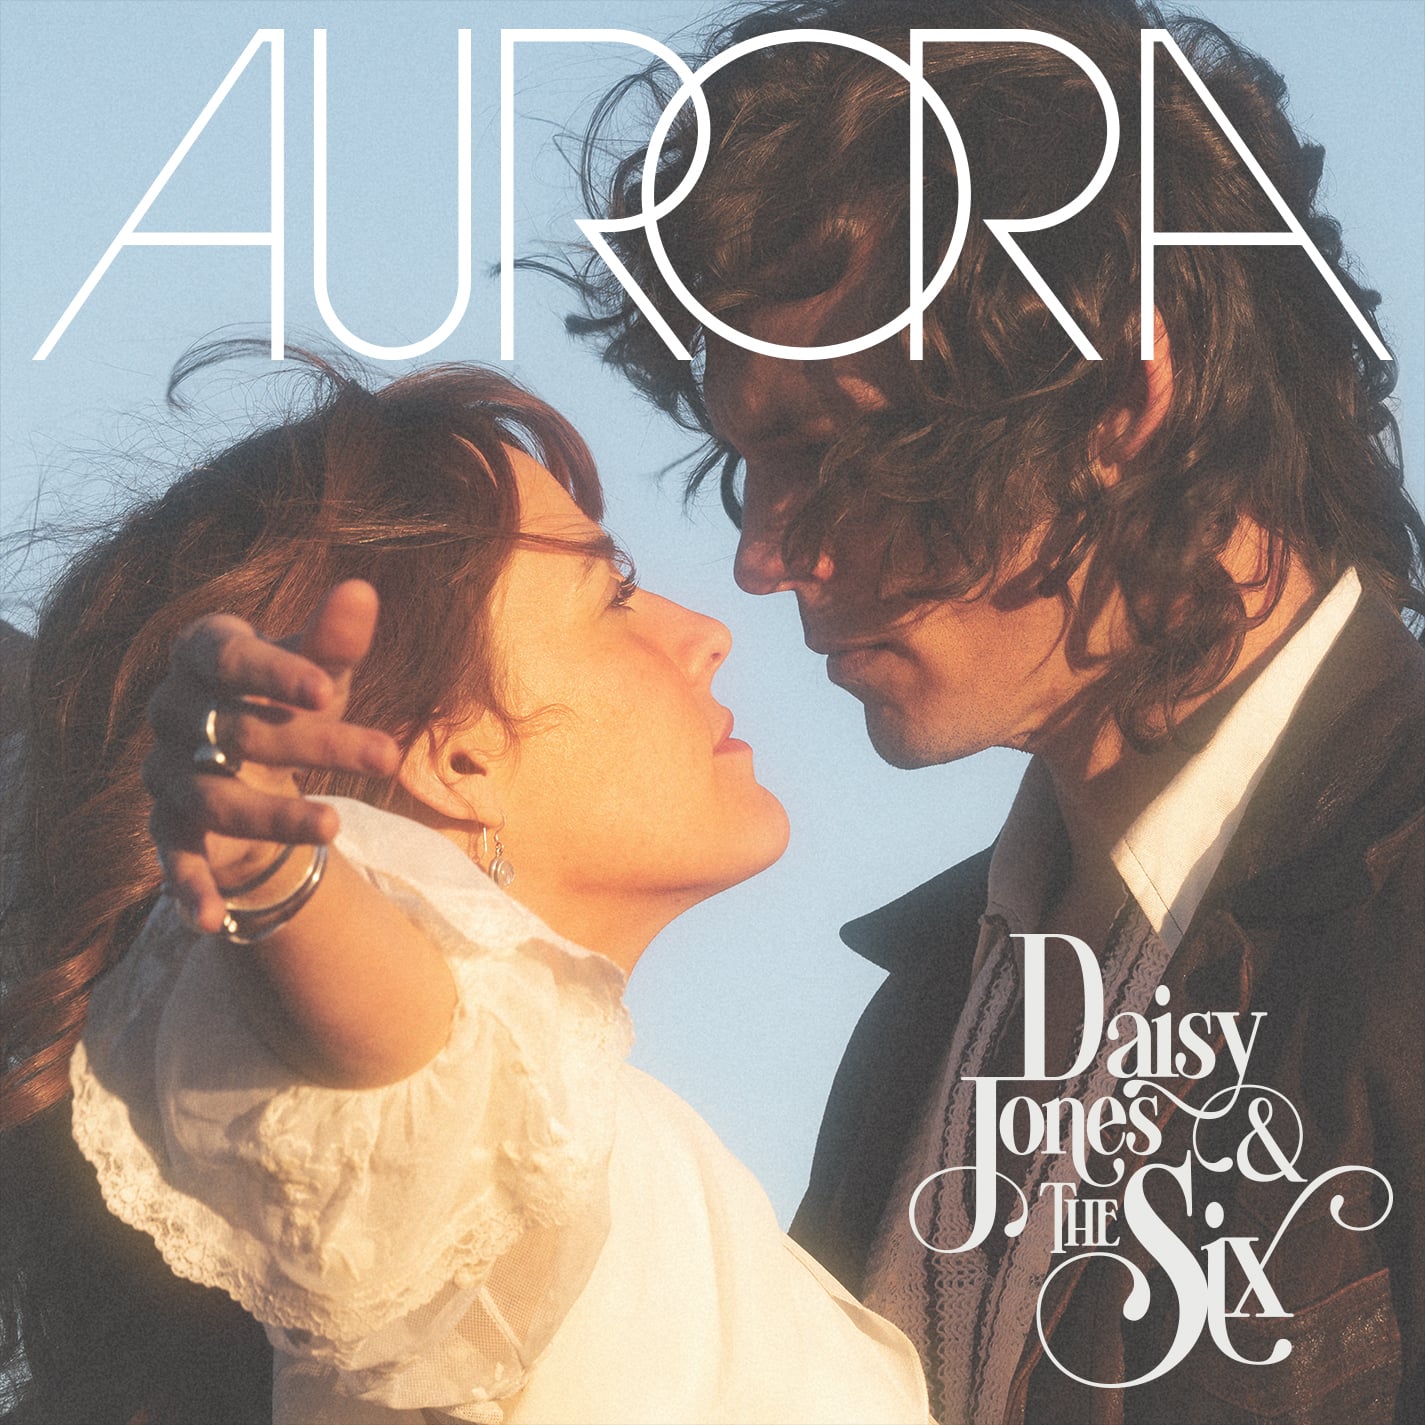 Aurora Album Cover by Daisy Jones and the Six